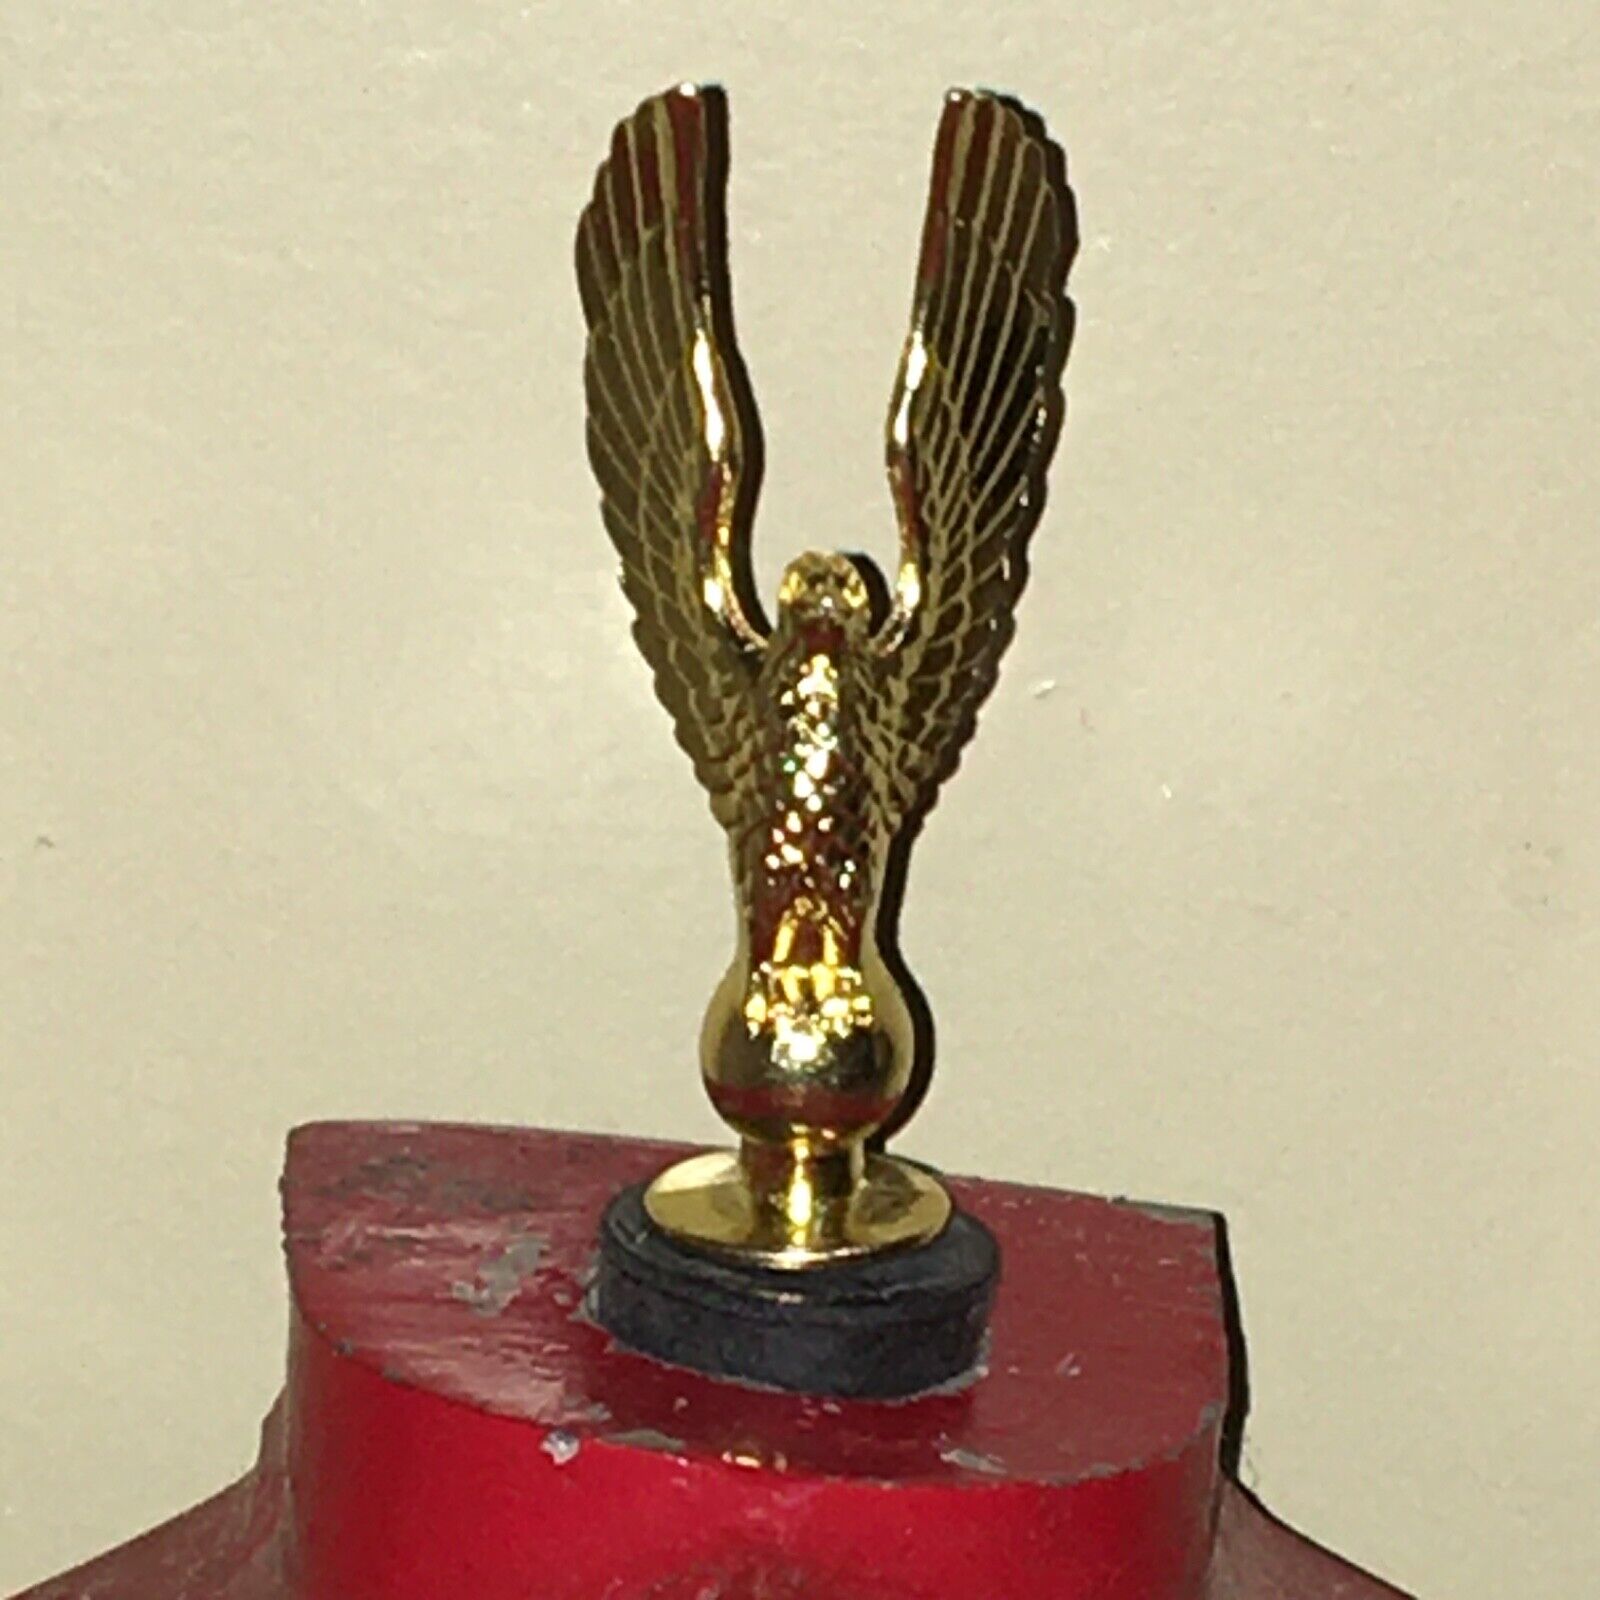 American Gold Metal Eagle Finial Topper for Gamewell Fire Alarm Police Box